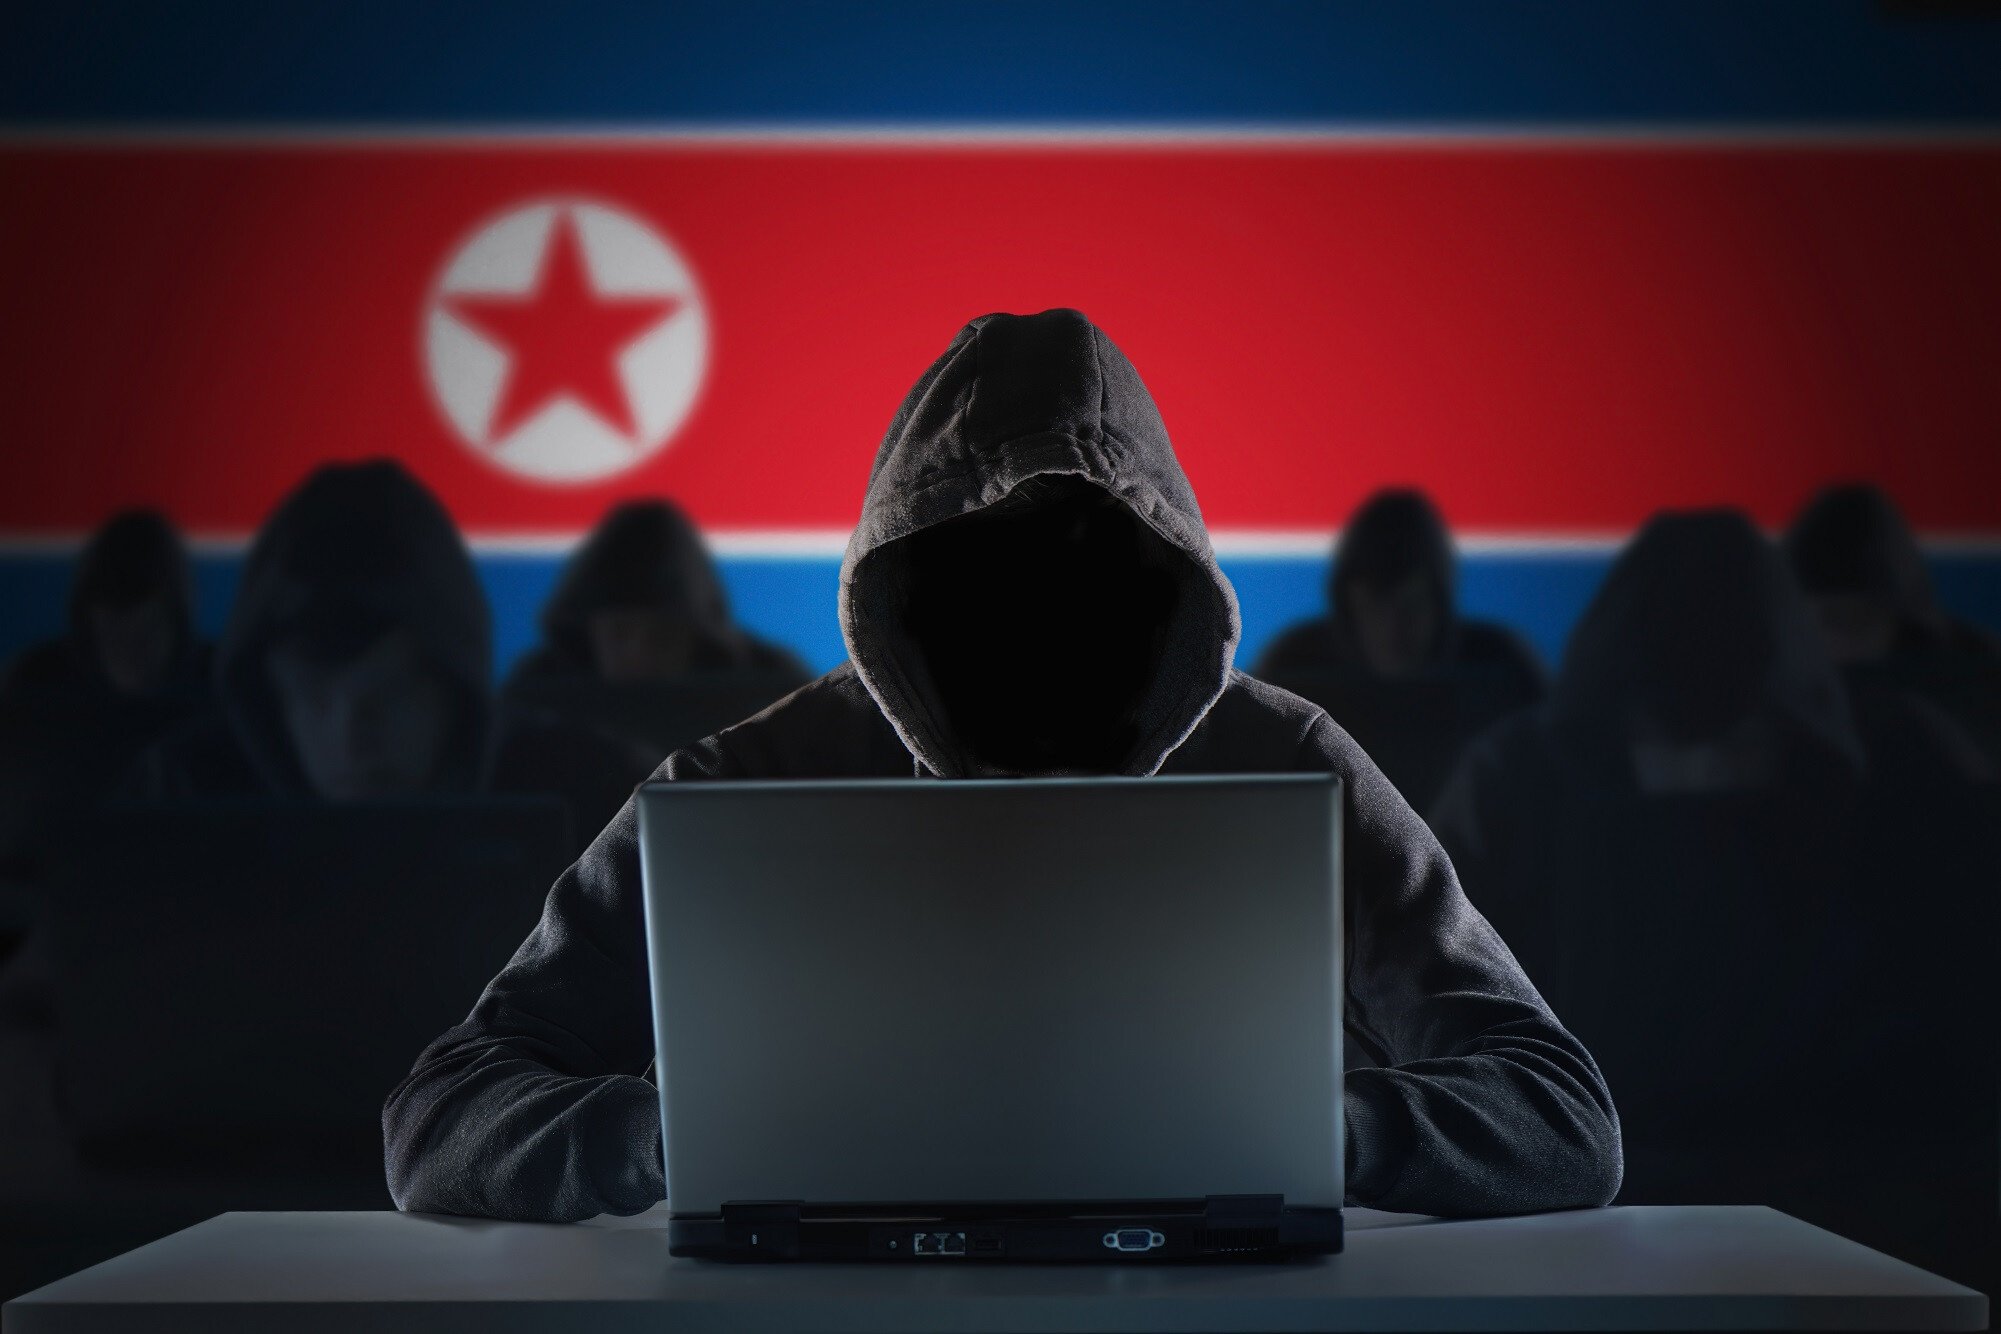 Wallet Addresses Linked to $200 Million Euler Exploit and Axie Infinity Hack Mysteriously Interact – Are North Korean Hackers Involved?